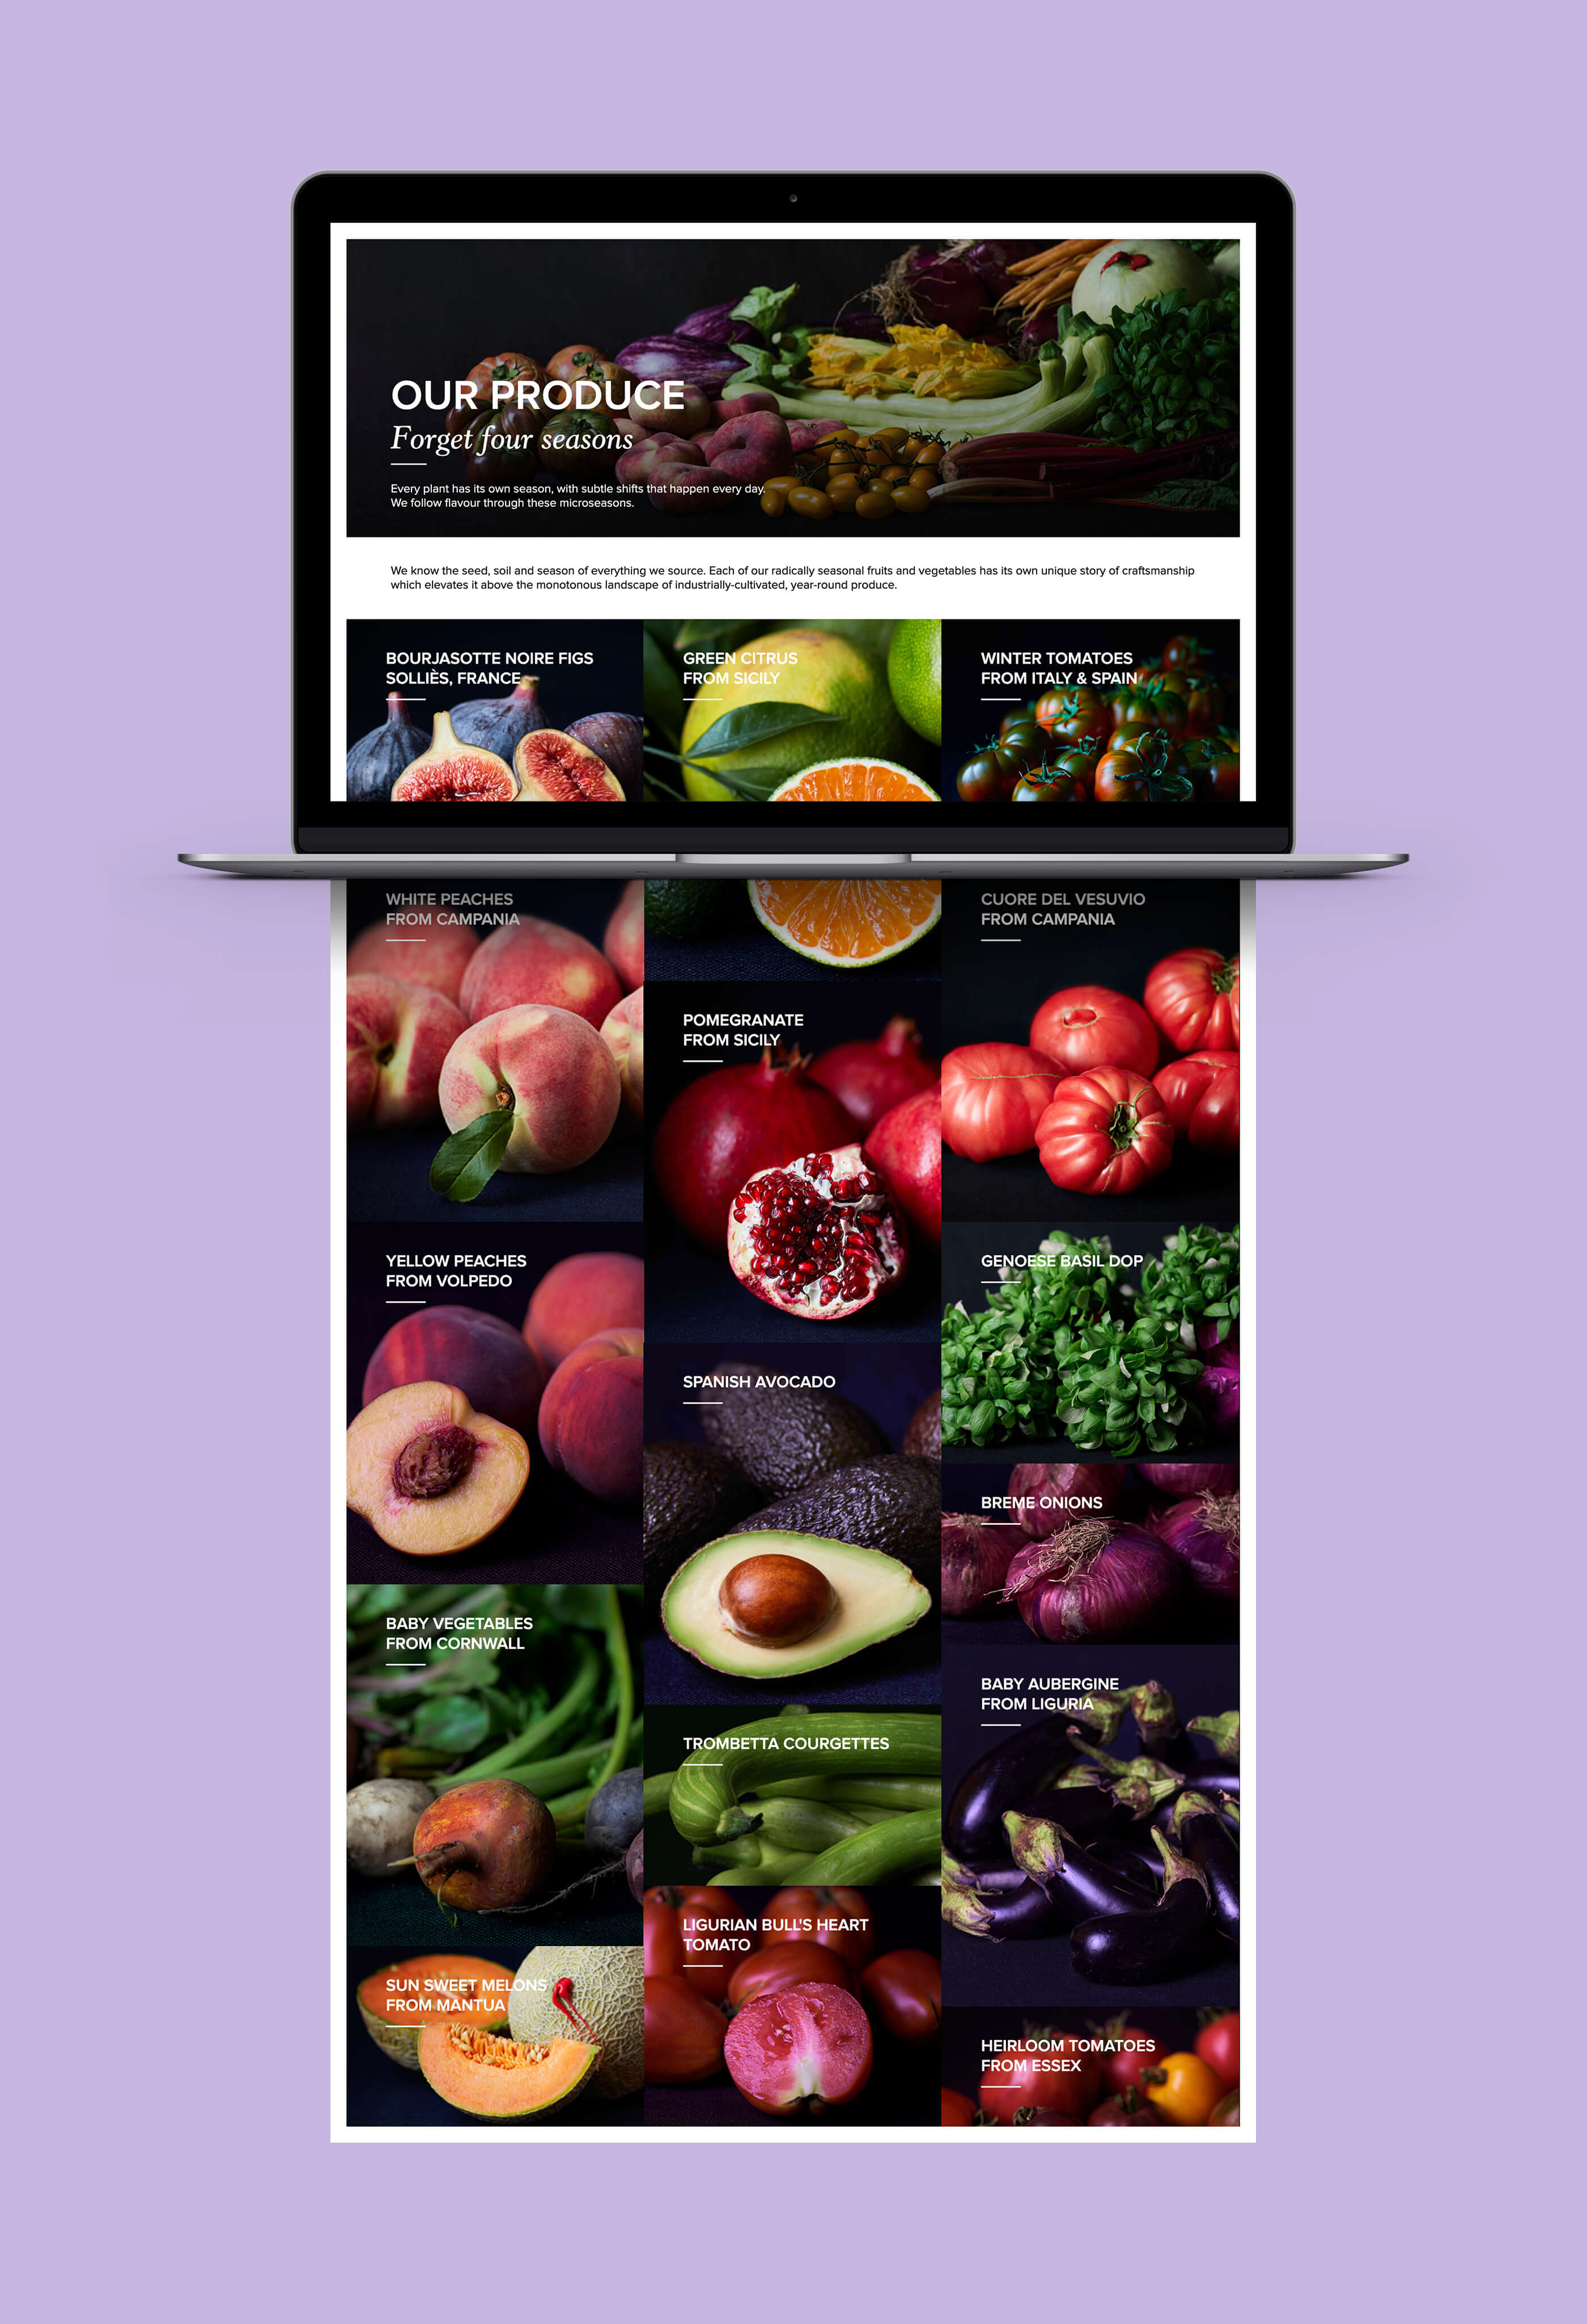 Full 'produce' web page mockup of the Natoora website on a 3D render of an Apple MacBook computer, on a pastel purple background